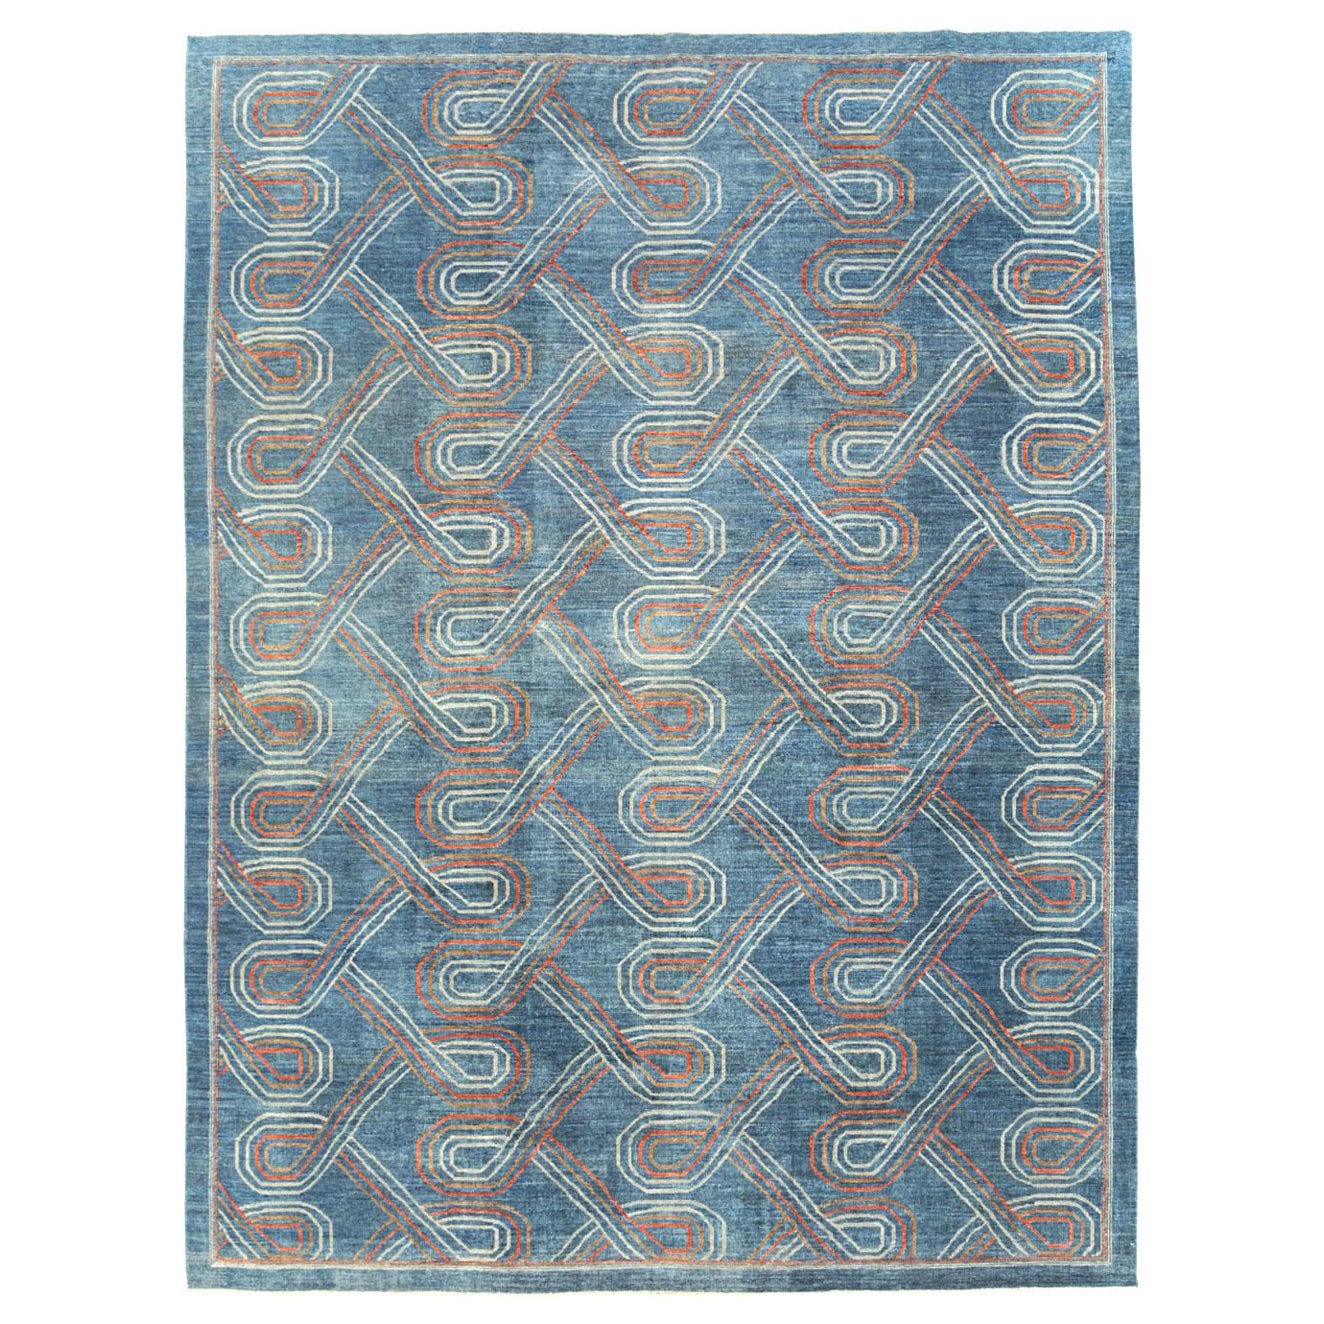 Galerie Shabab Collection Handmade Turkish Contemporary Room Size Carpet